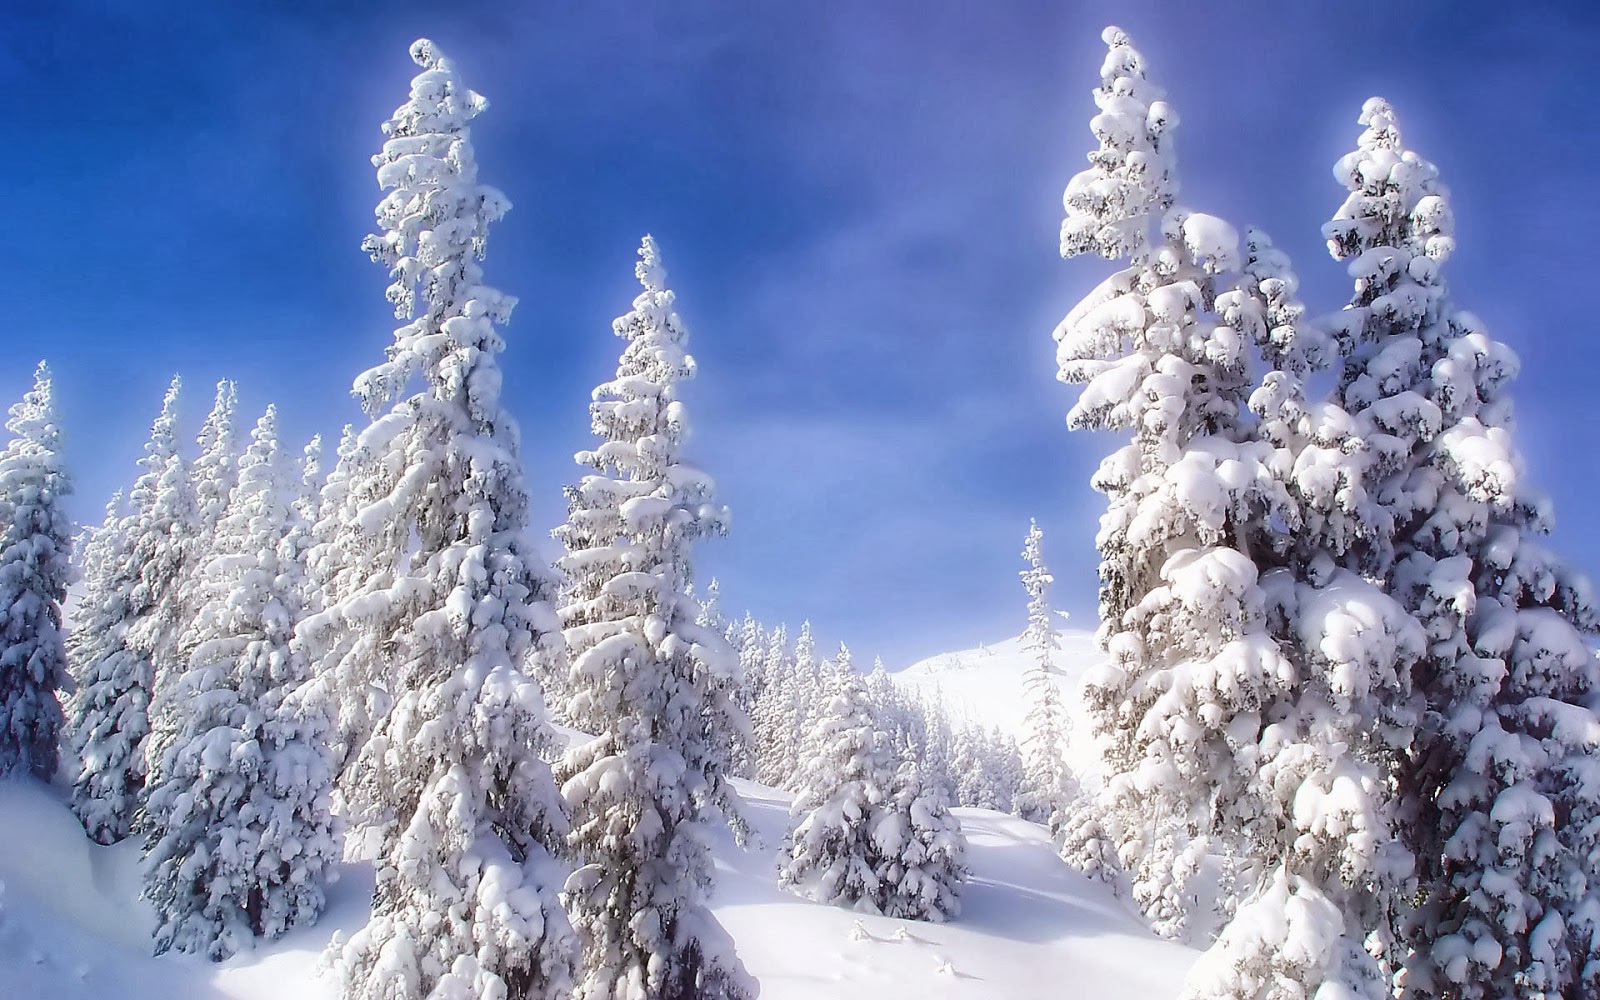 Snow Fall Winter HD Wallpapers   HD Wallpapers Blog